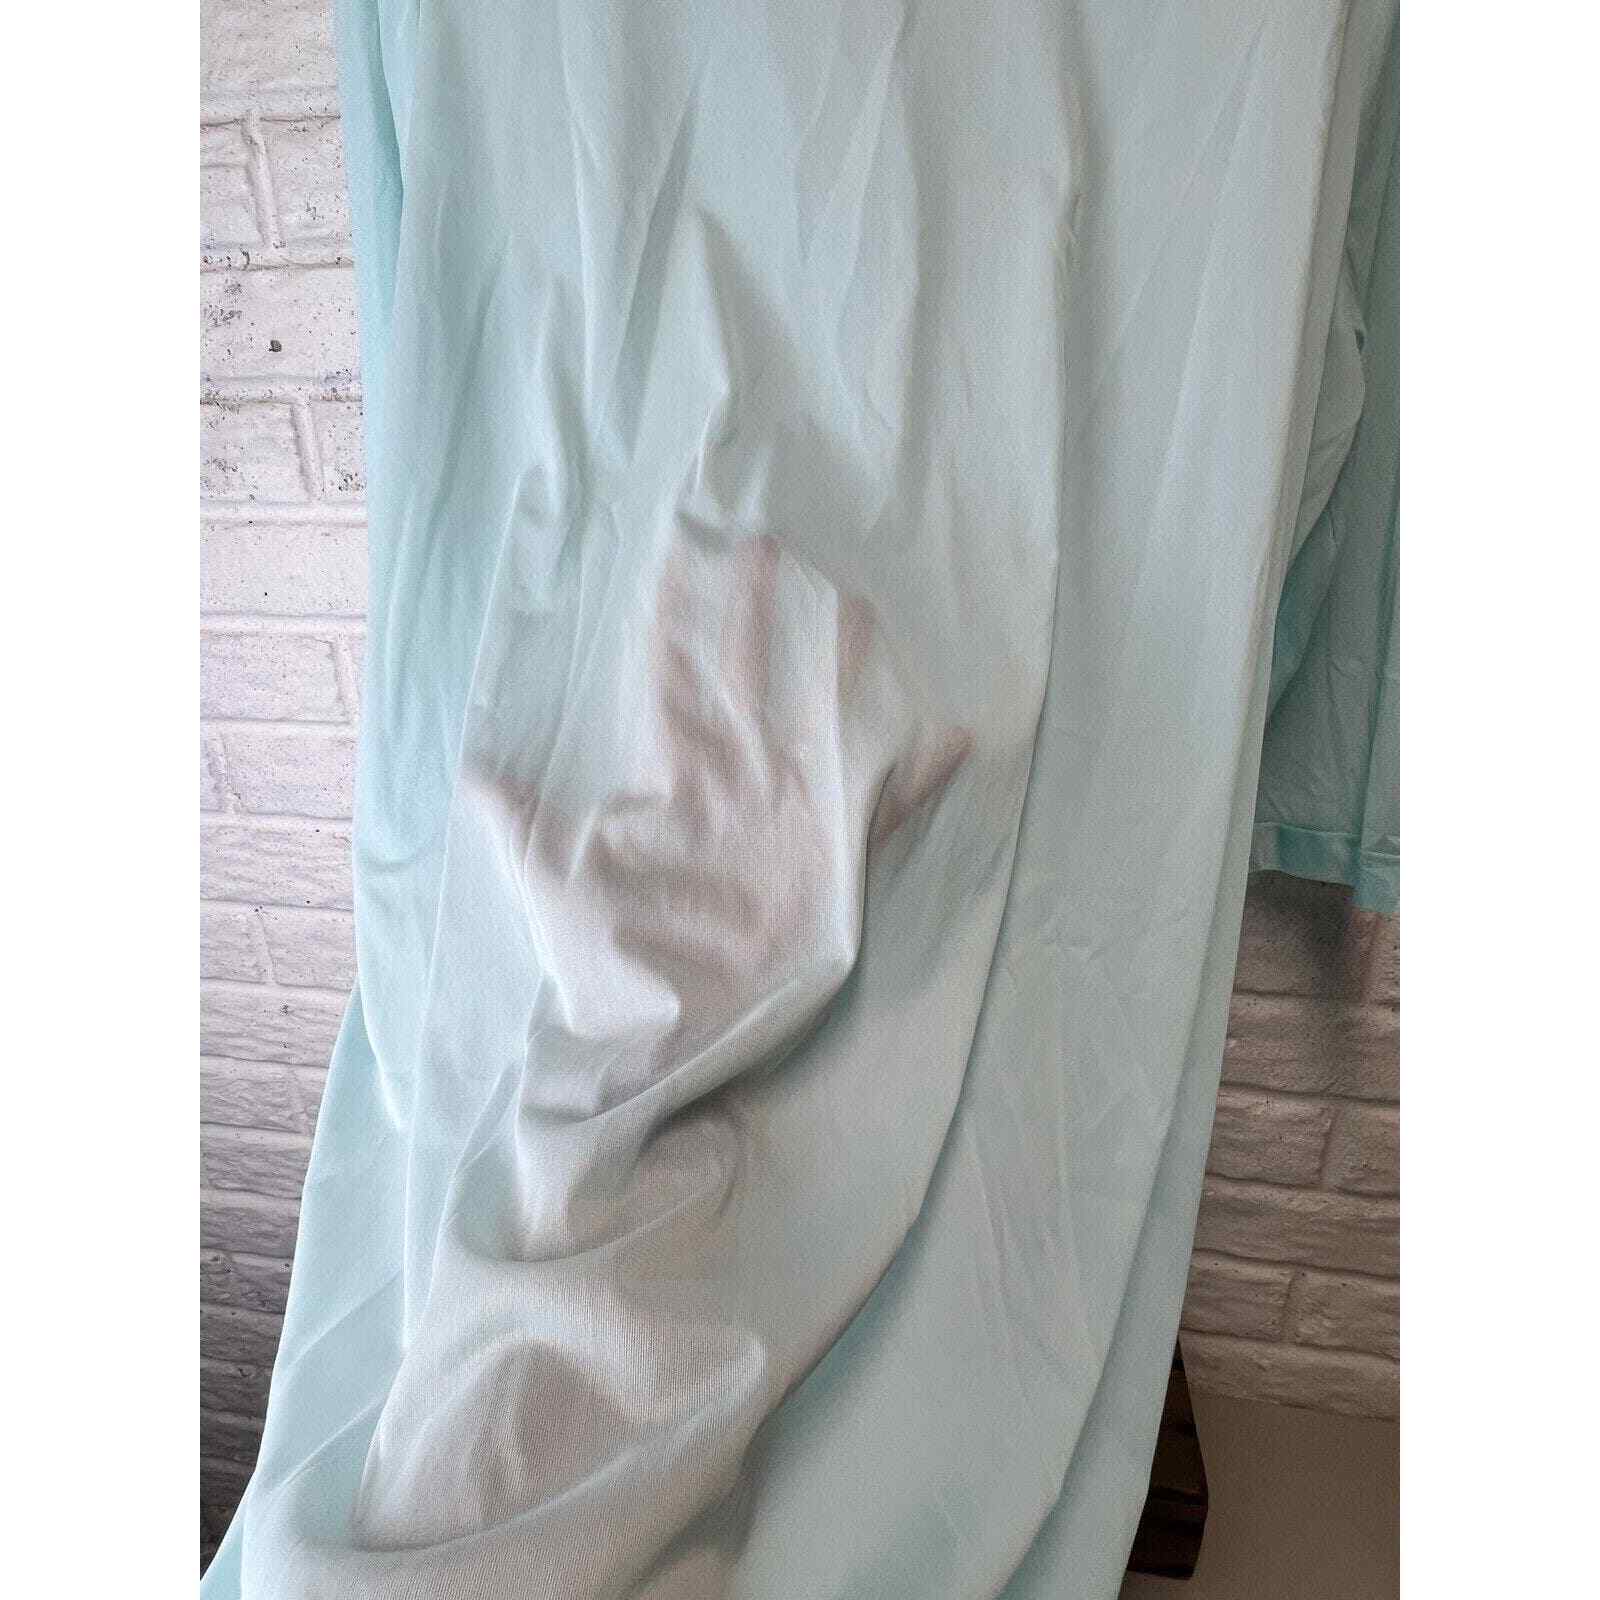 Vanity Fair Dressing Gown Classic Mint Green Larg… - image 5